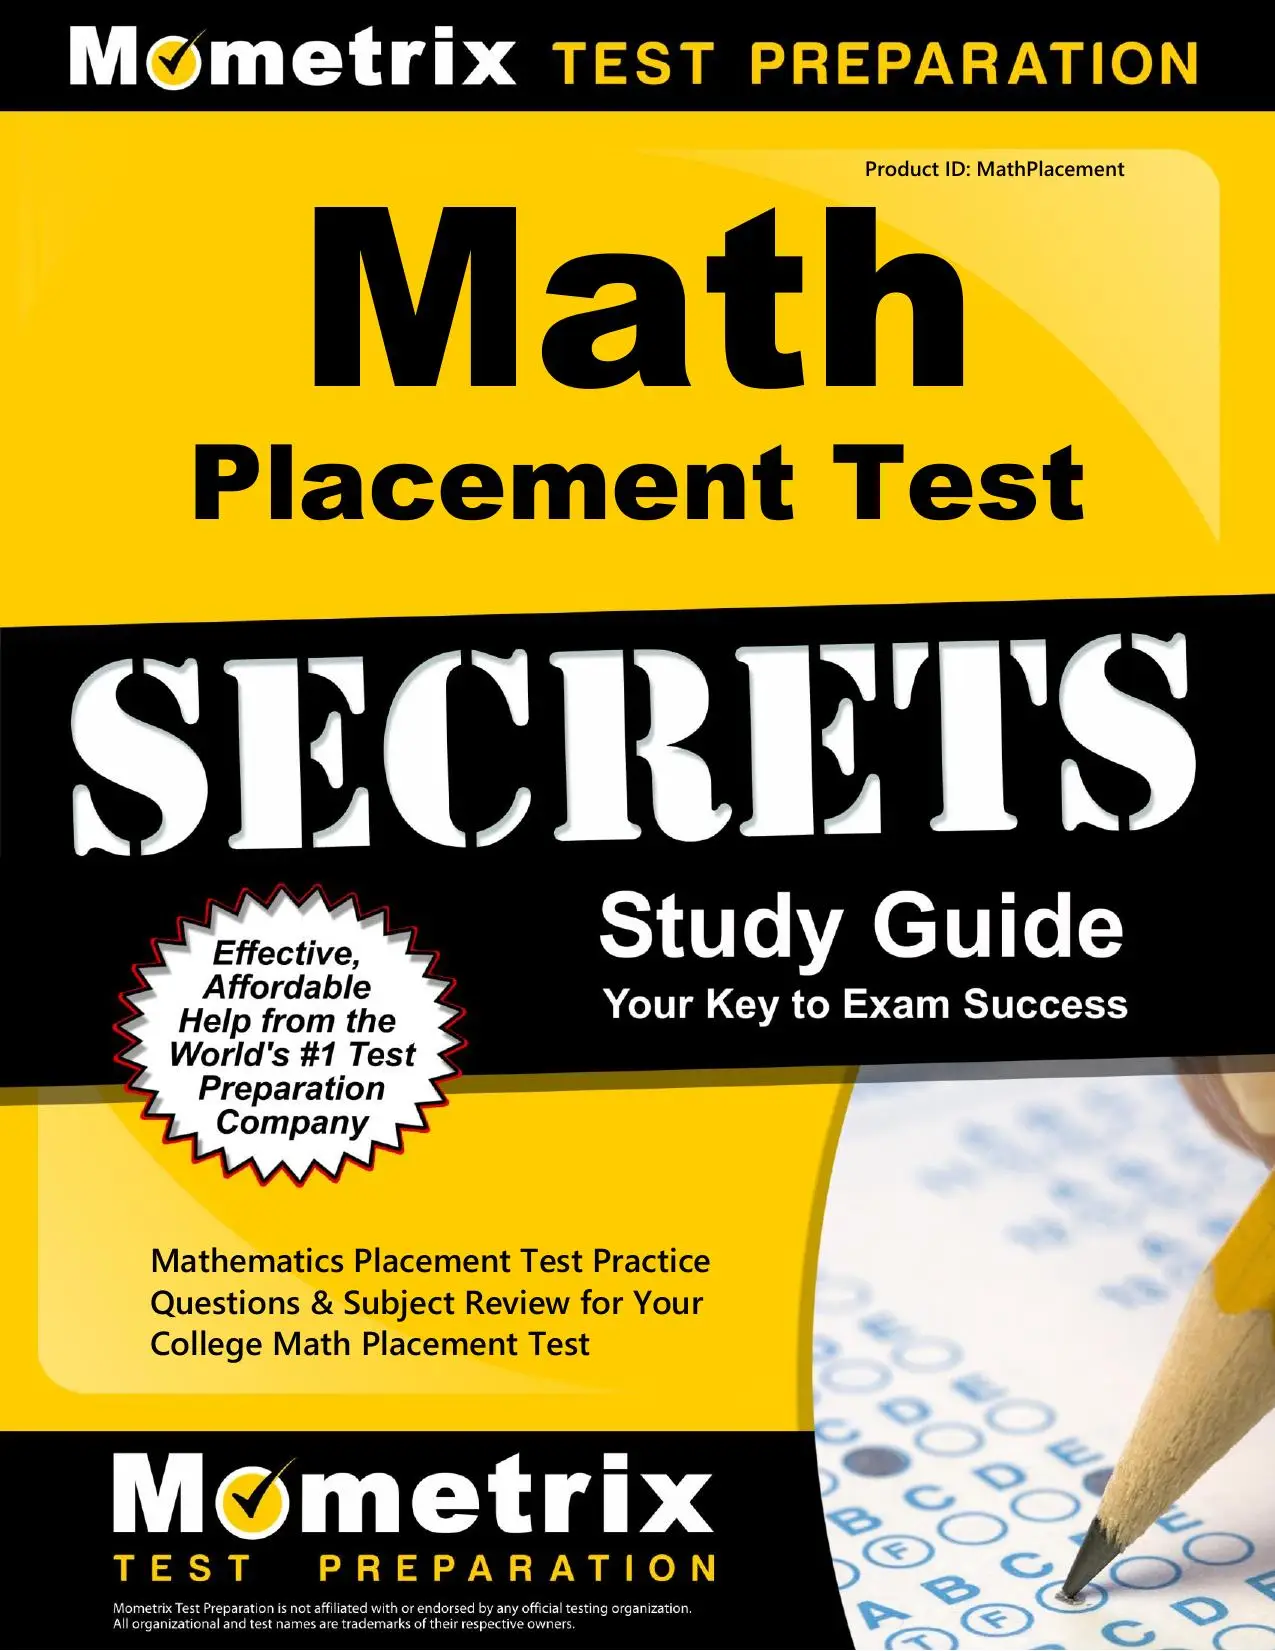 Is The Math Placement Test Hard